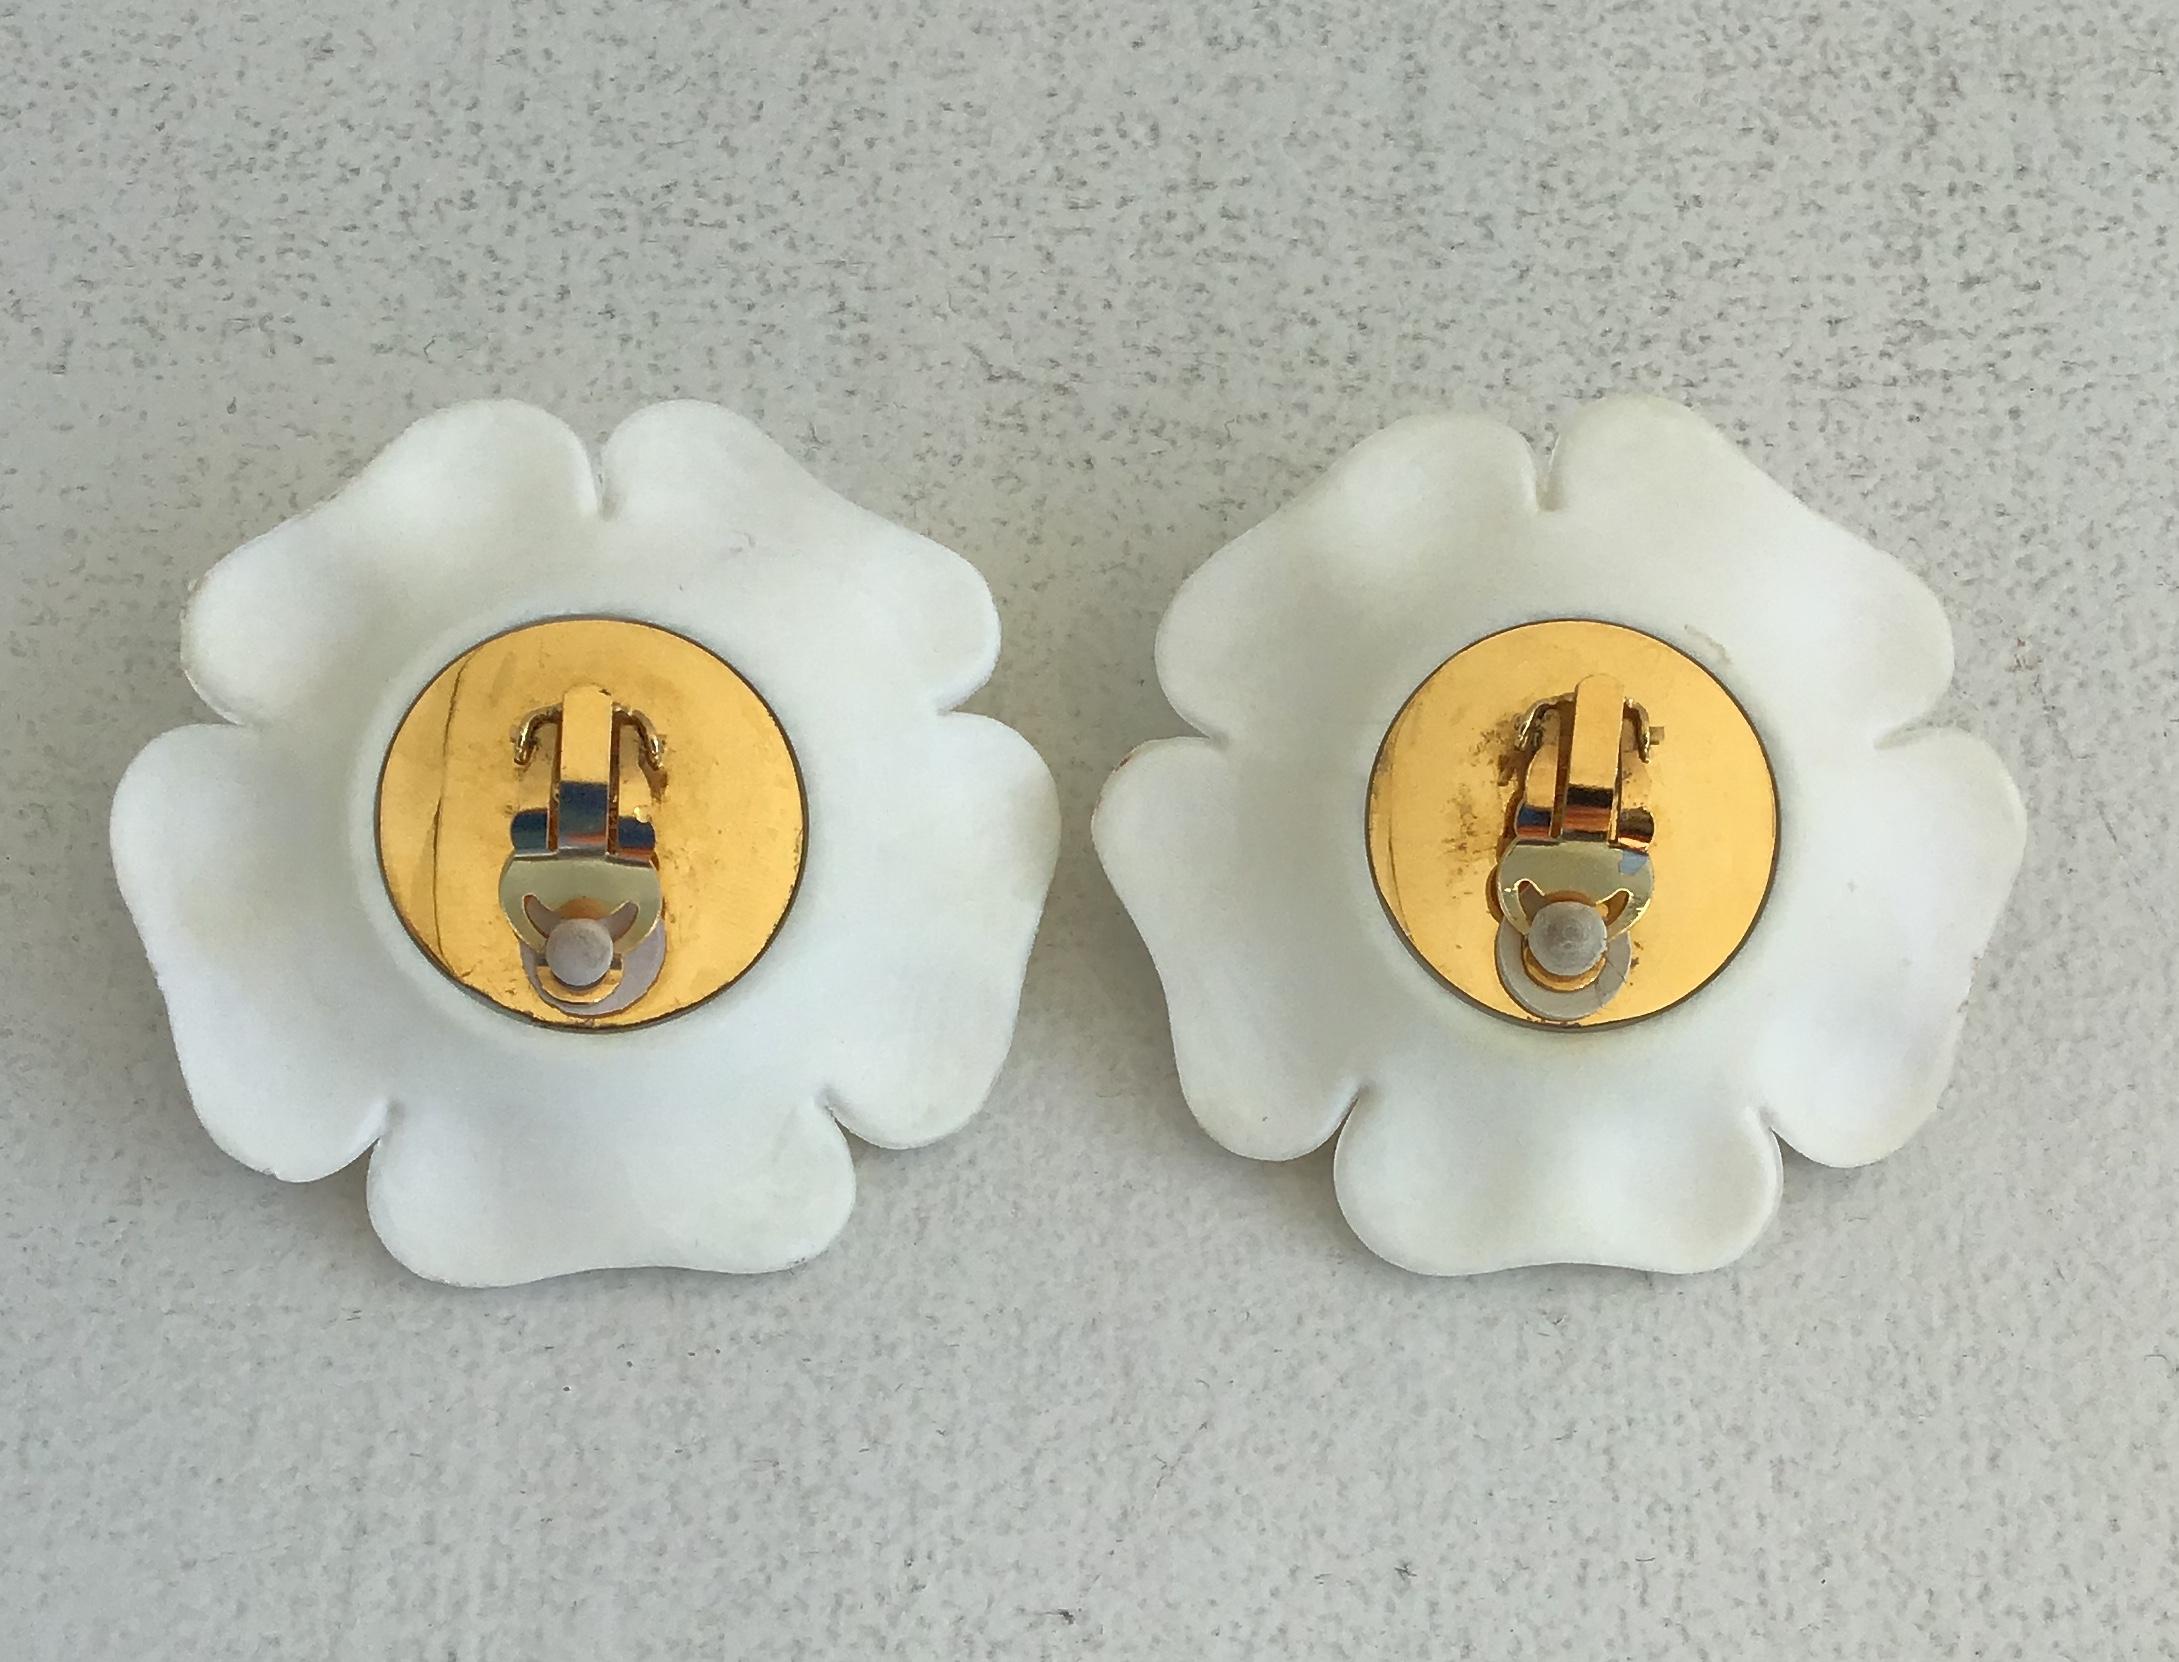 Chanel White Resin Flower Clip on Earrings. Large white molded plastic pedals with gold center. and gold tone brass backing. Padded clips indicated on backside.